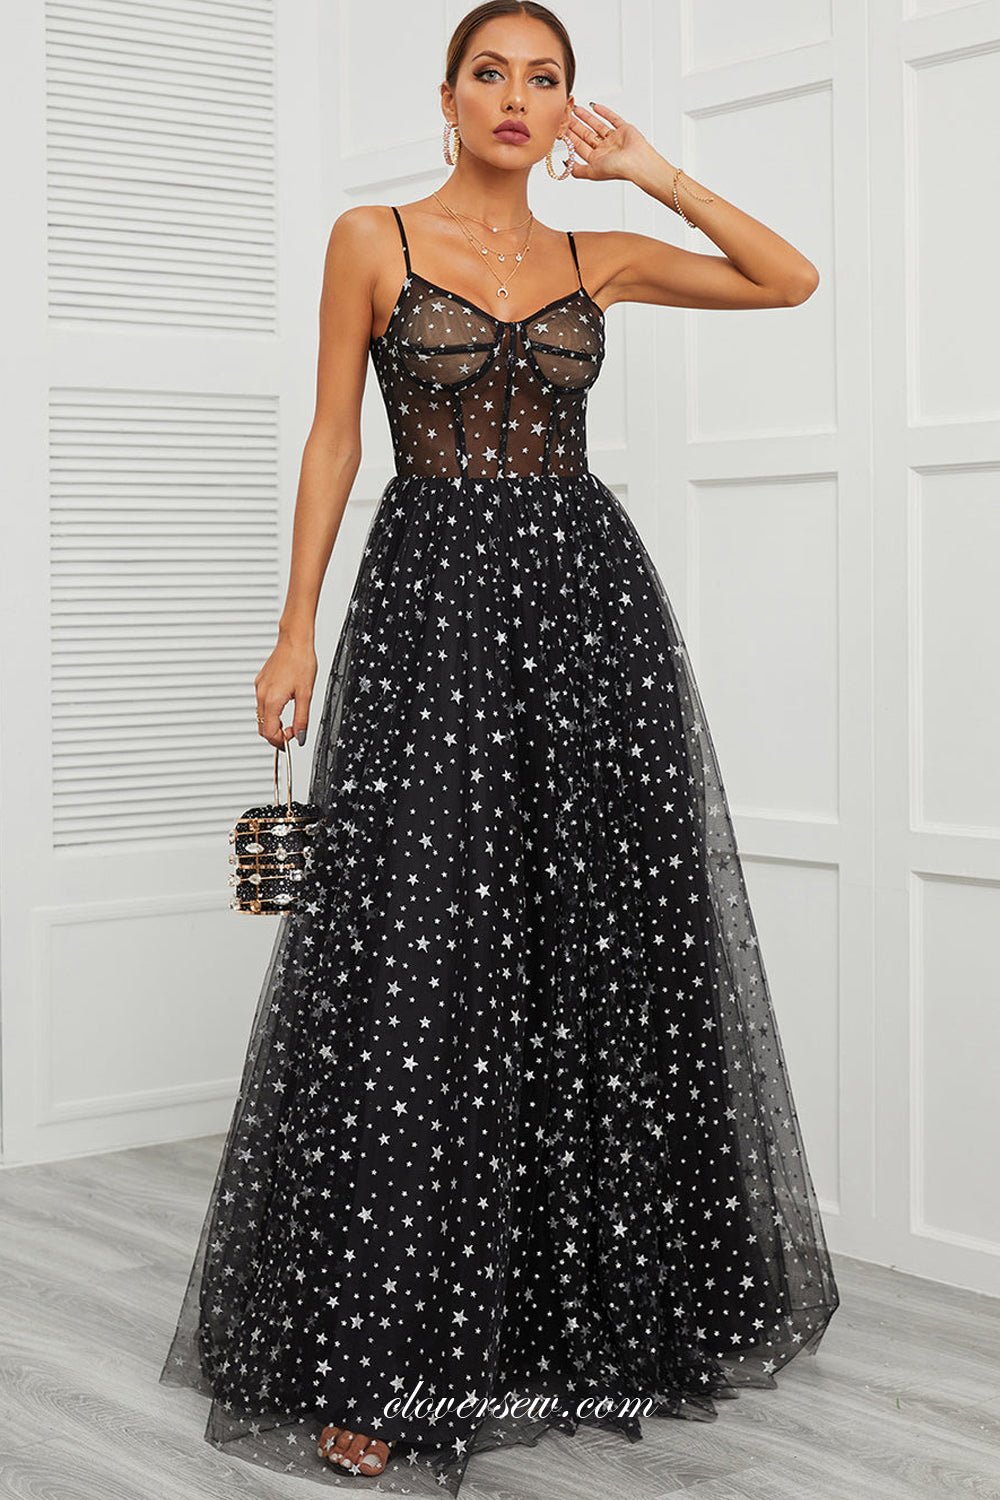 Black Star Tulle Spaghetti Strap A-line Floor Length Charming Prom Dresses, CP1026